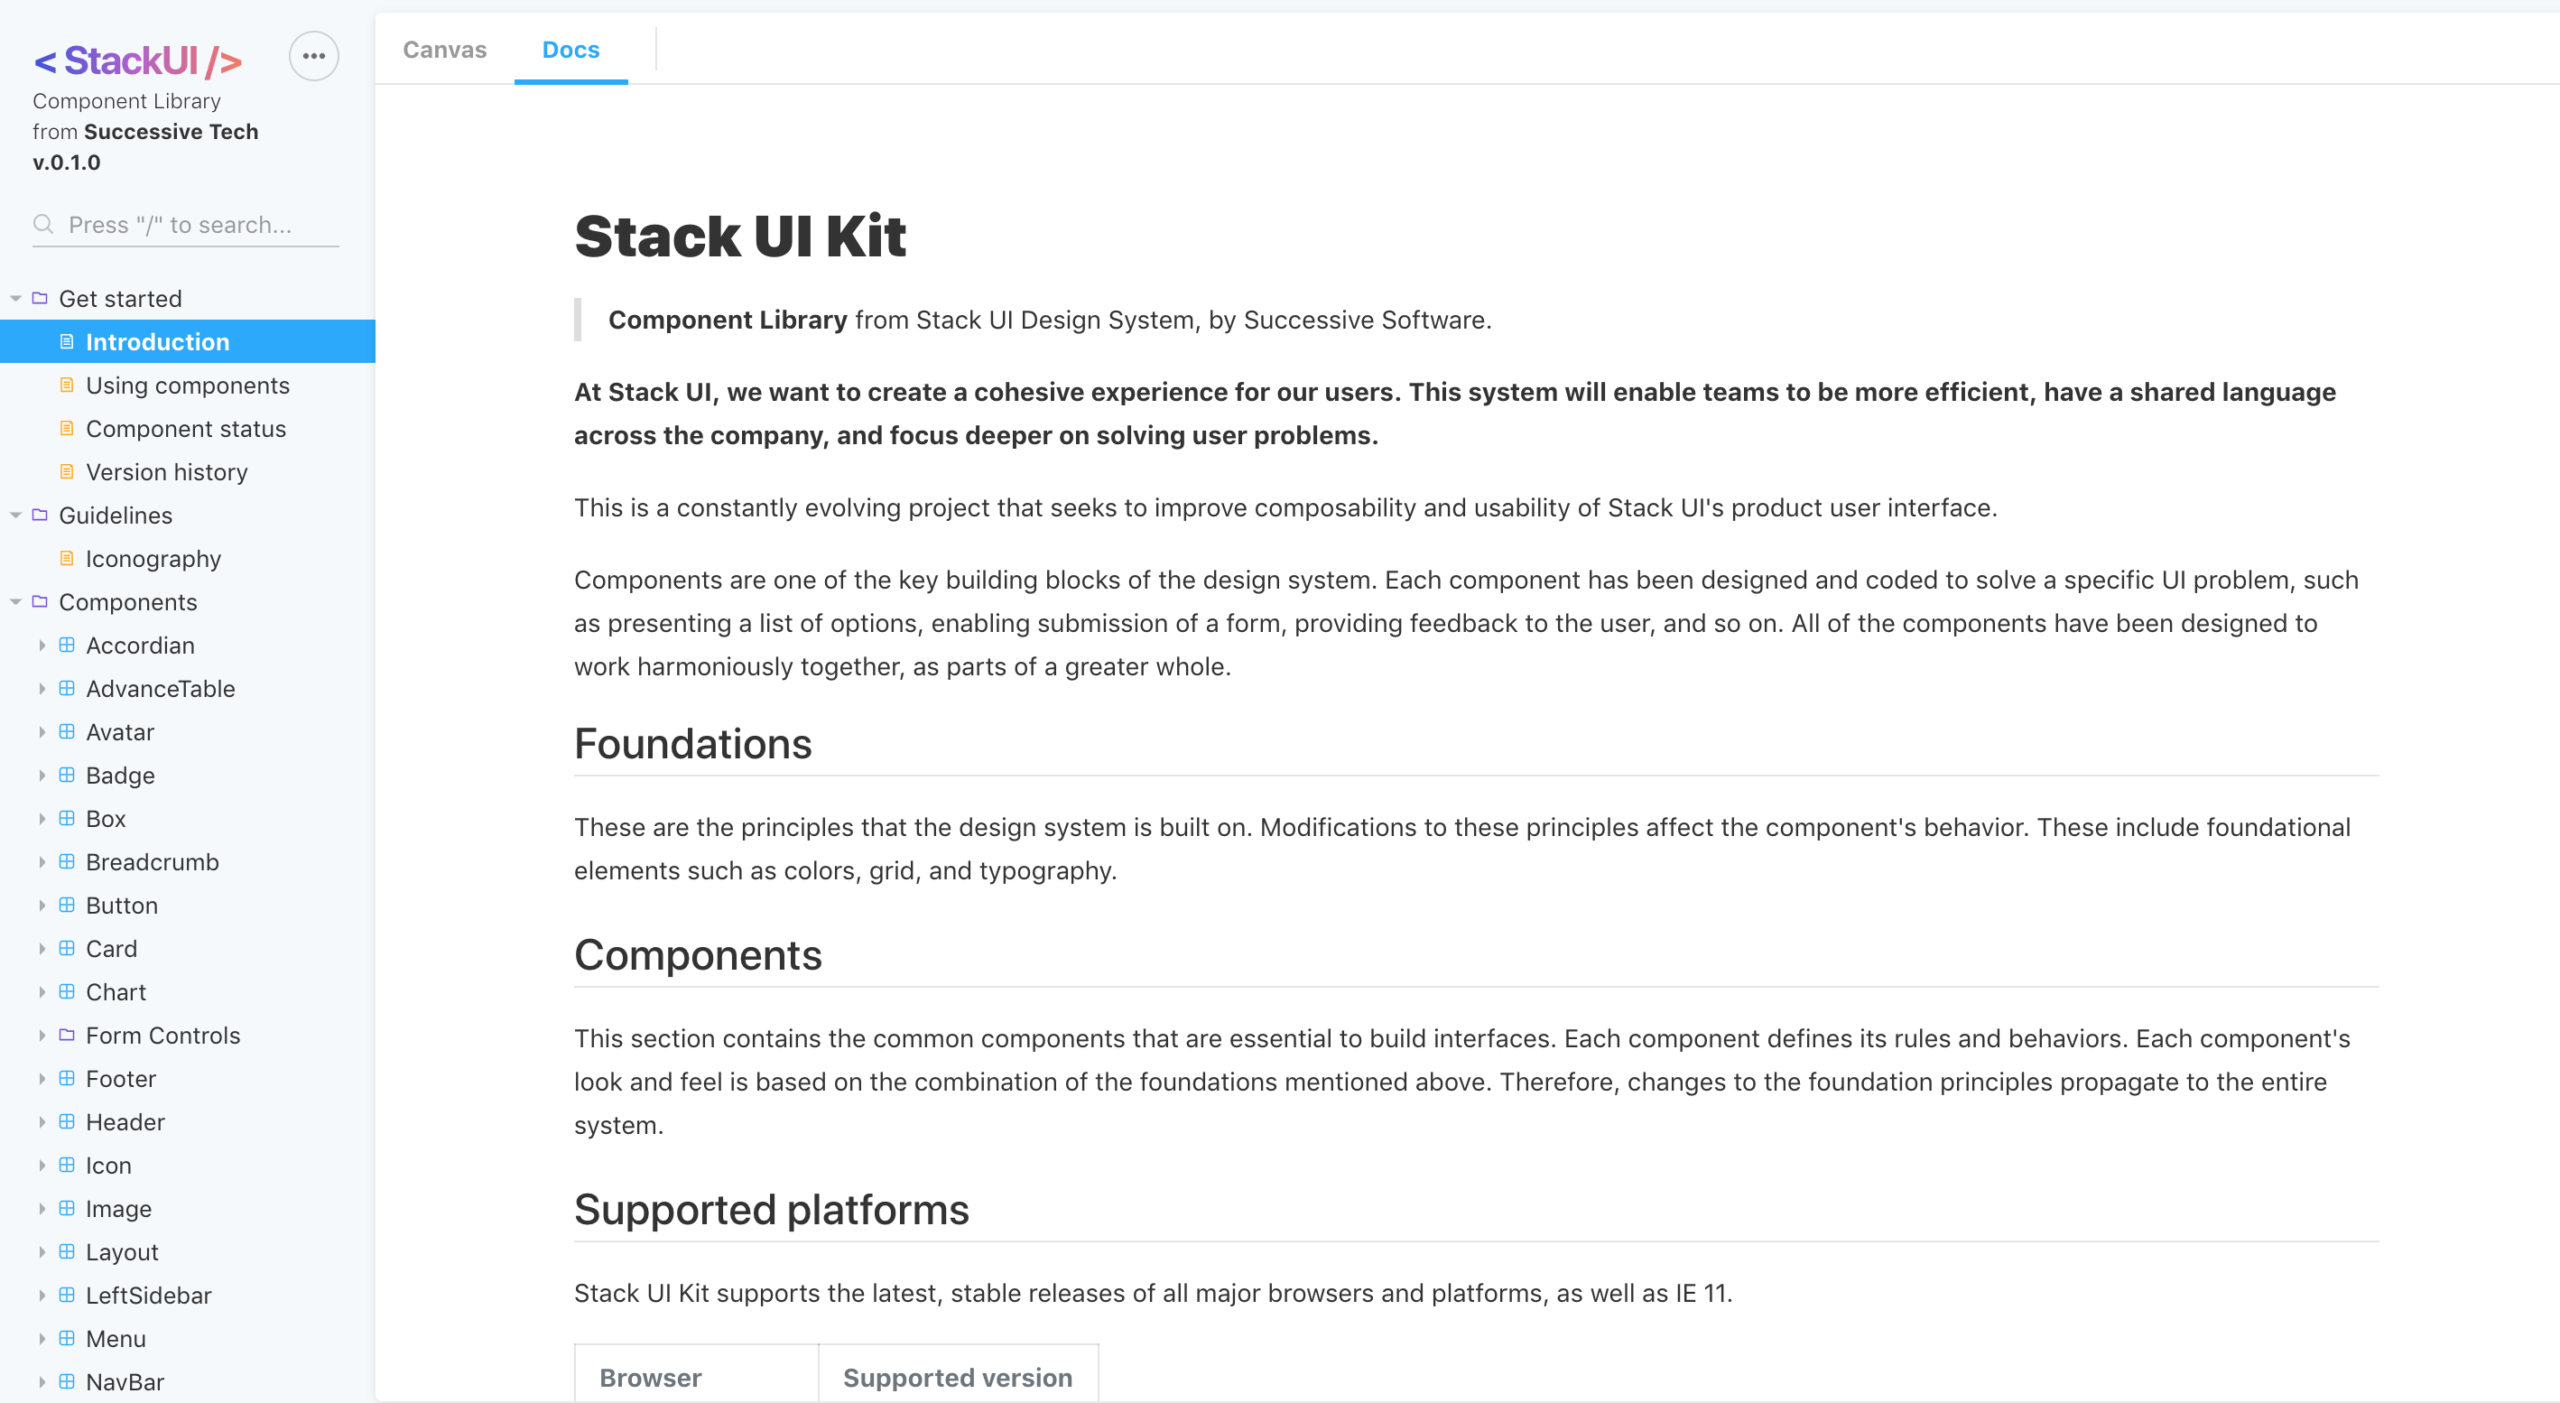 Documentation is available for each component of the Stack UI library